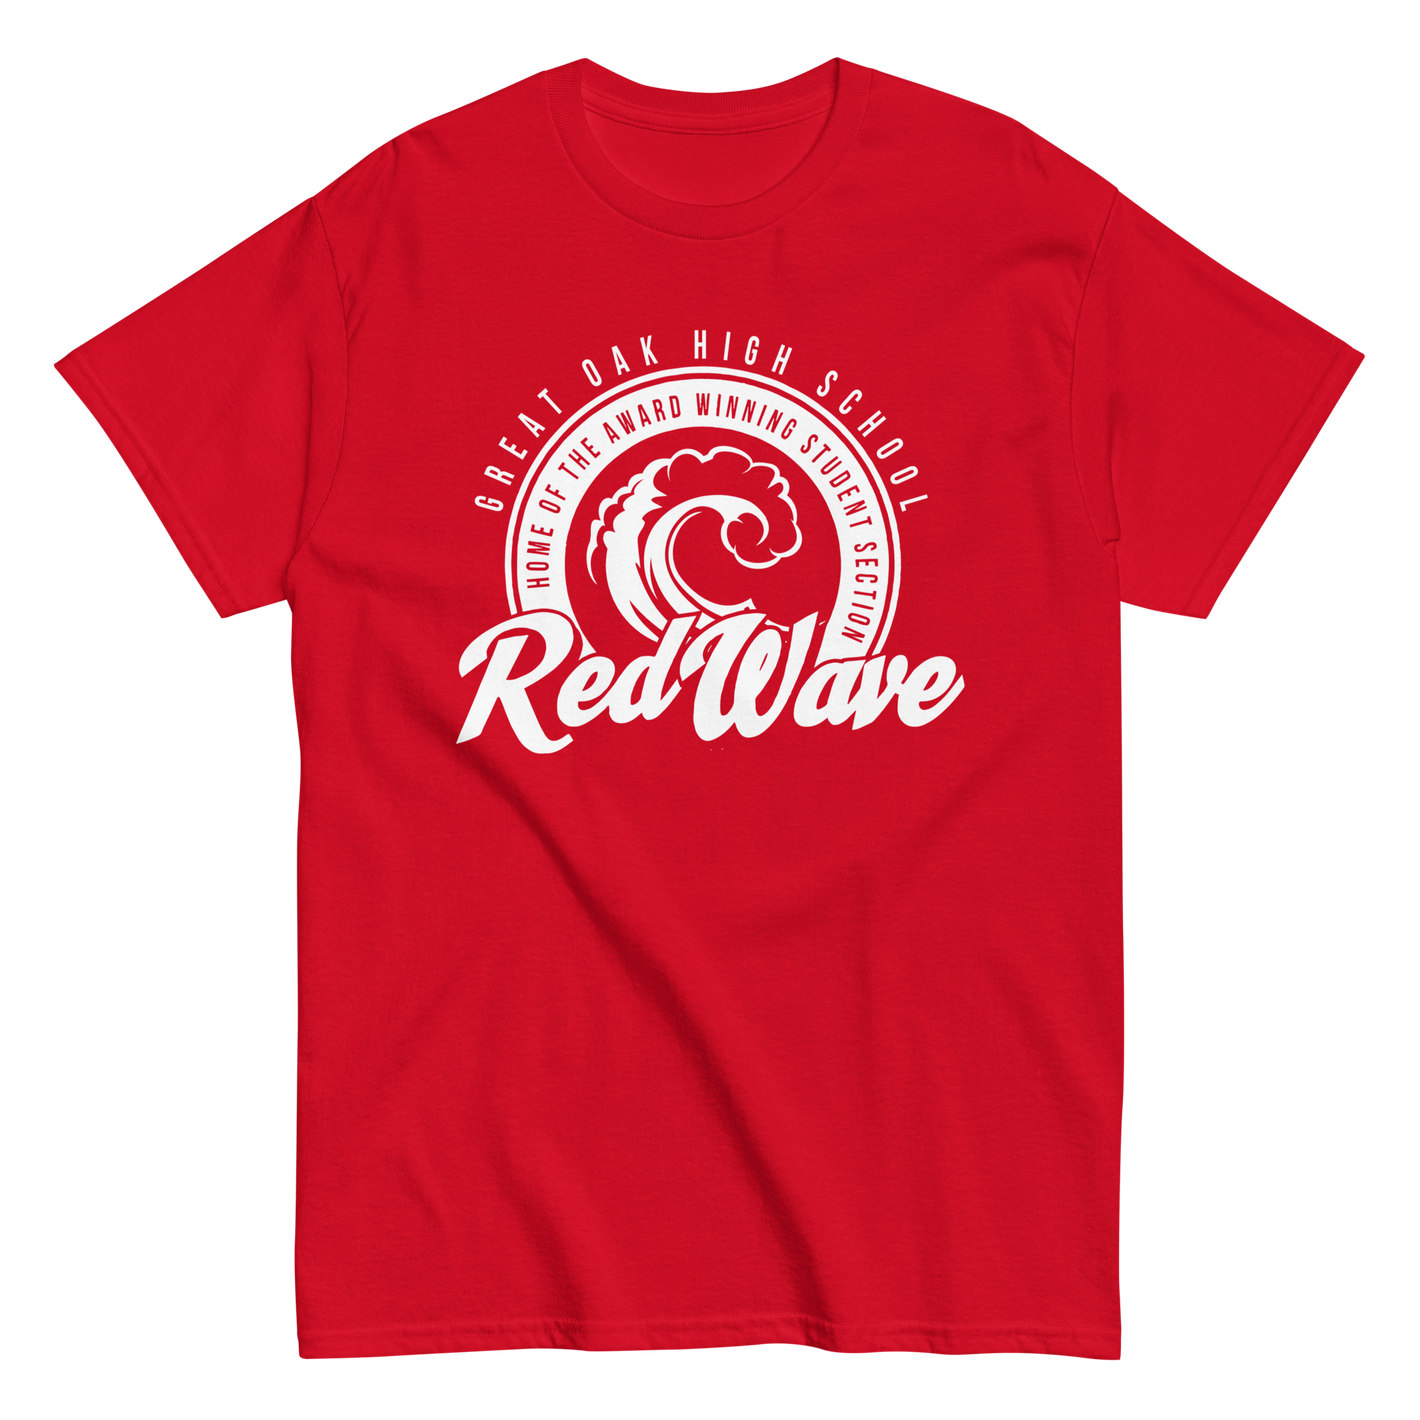 Red Wave classic tee